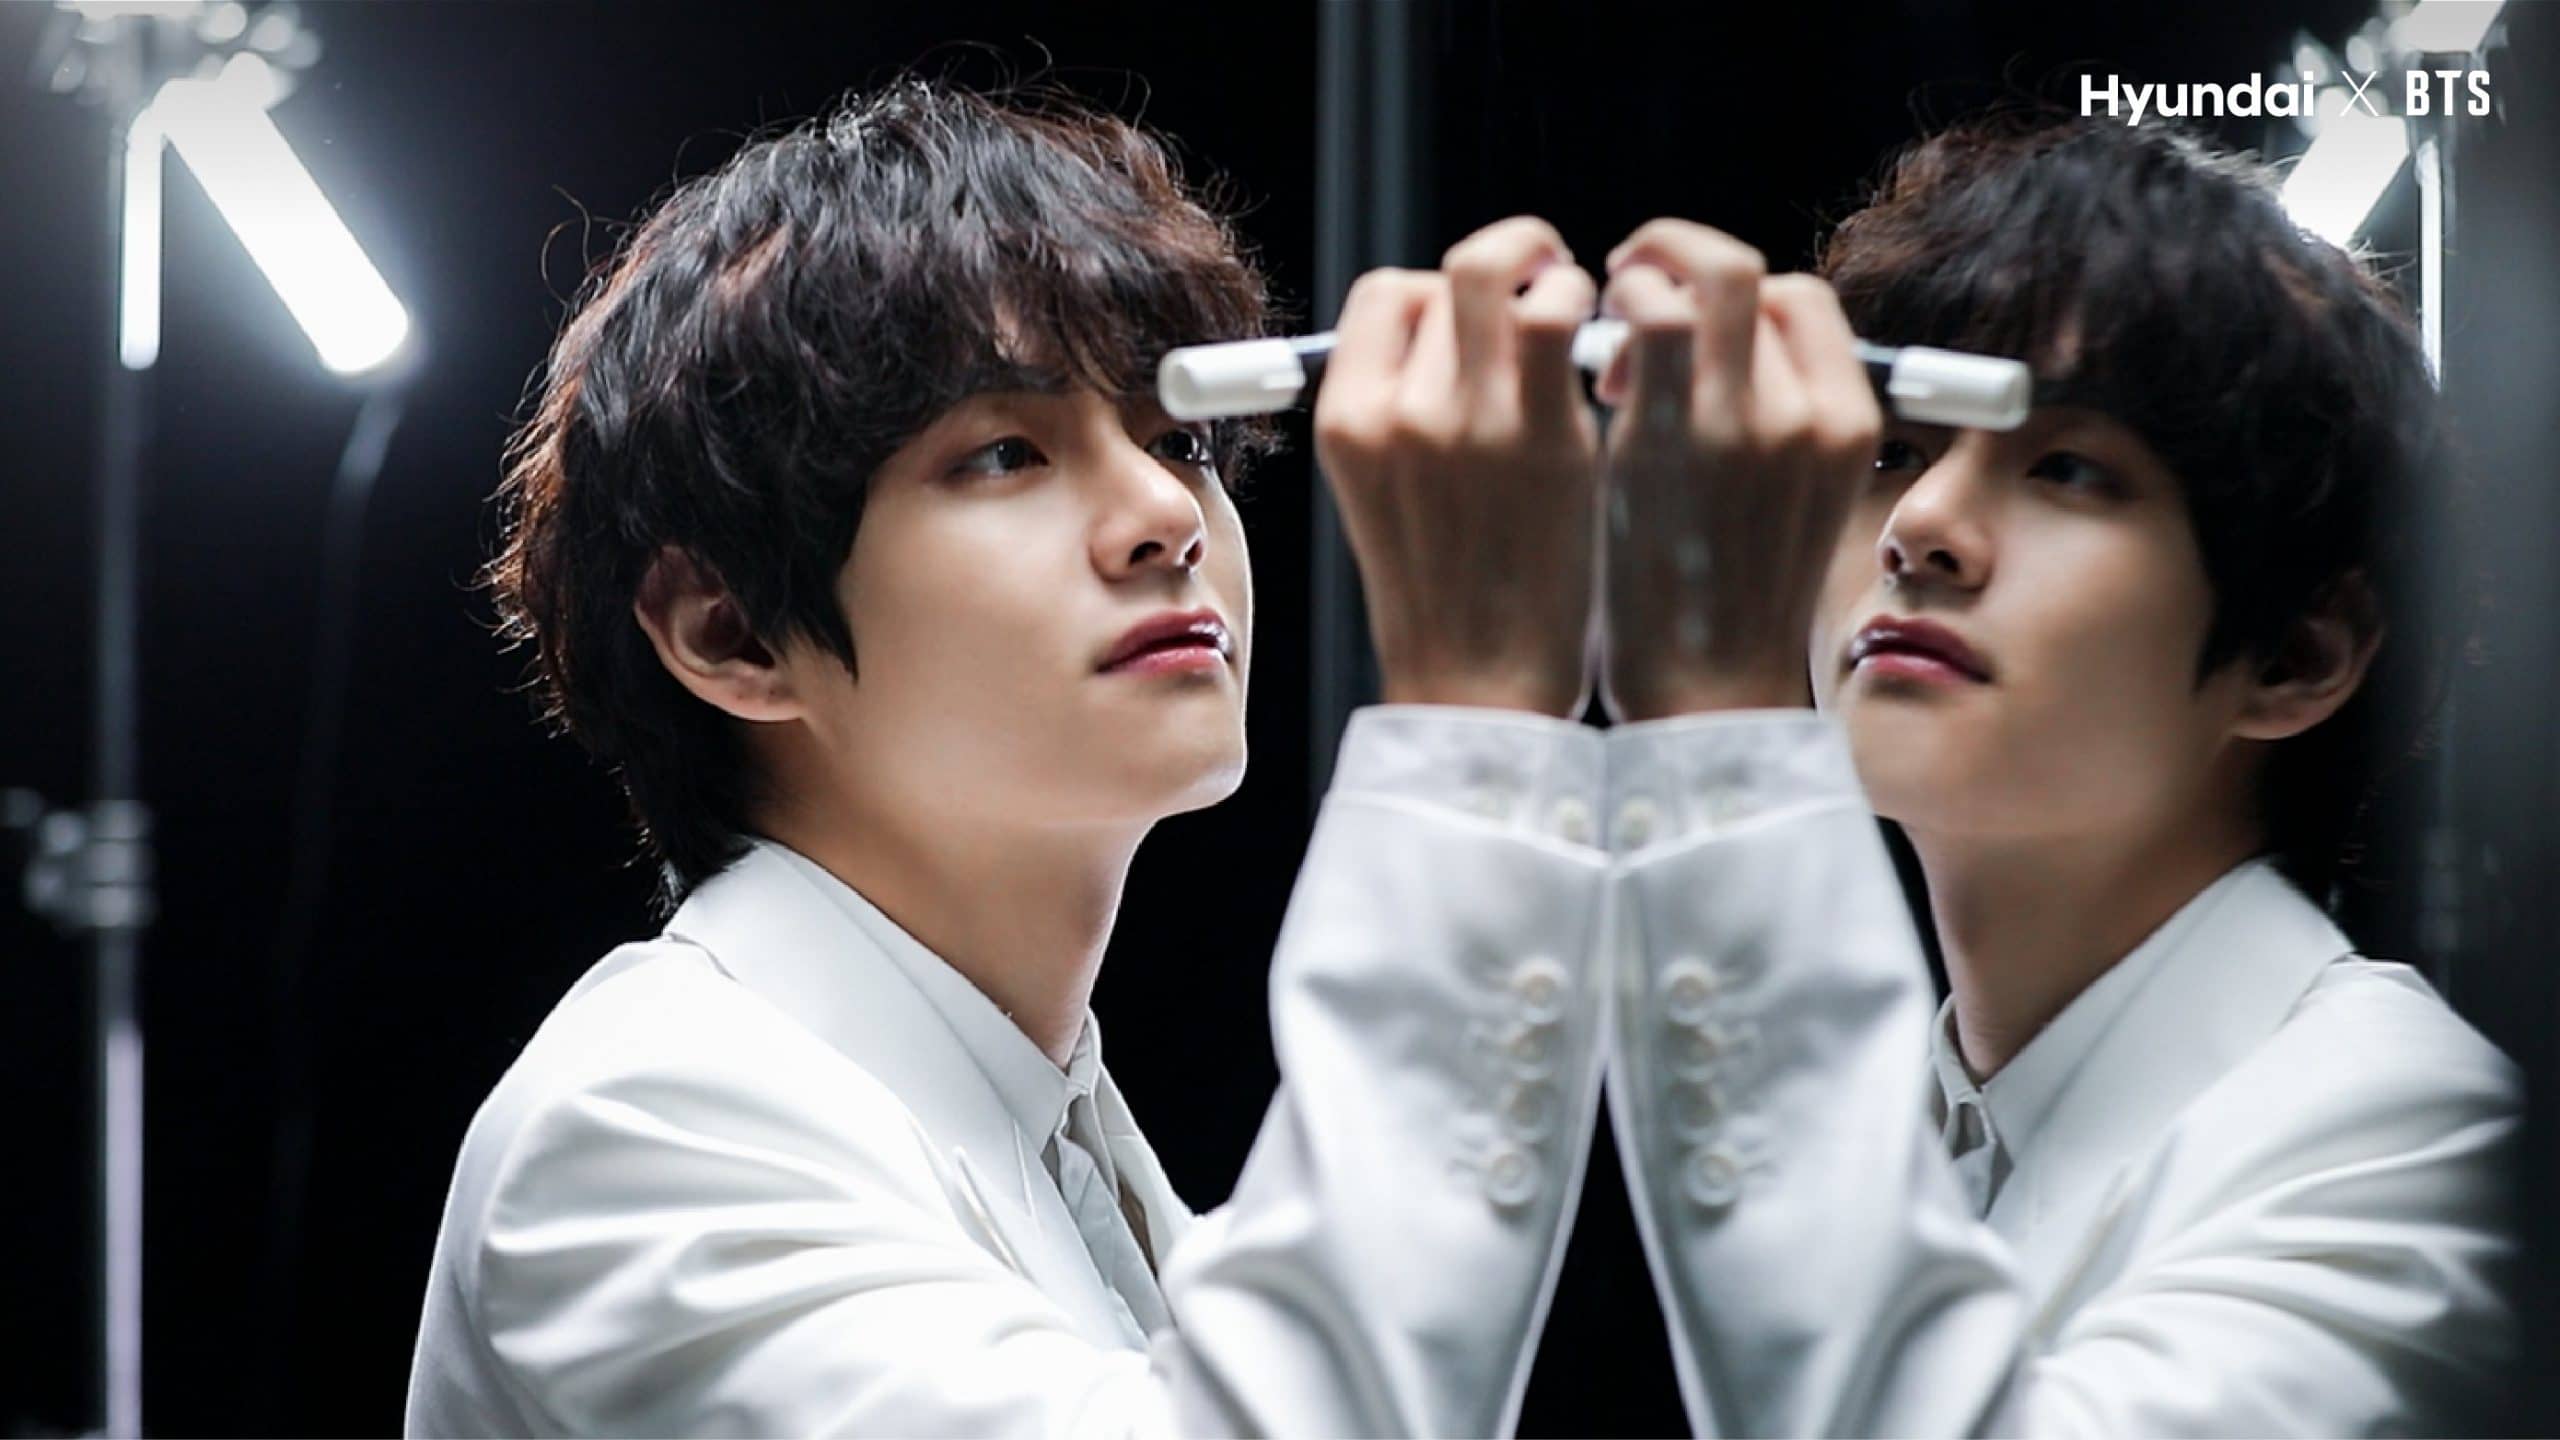 BTS V over SNS with the most 'like'